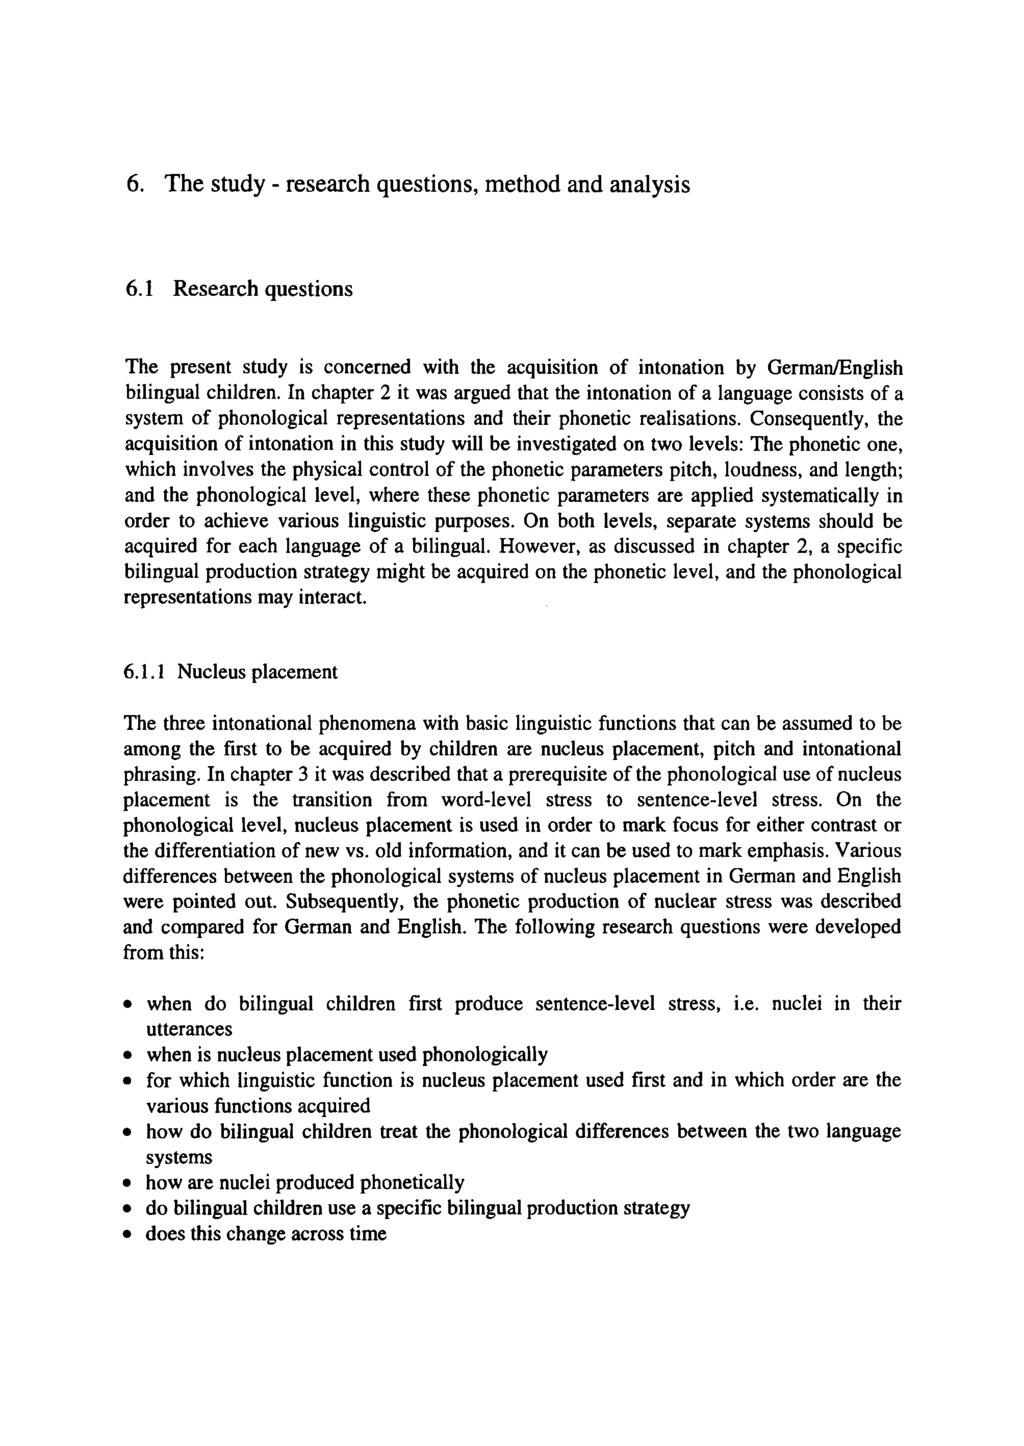 6. The study - research questions, method and analysis 6.1 Research questions The present study is concerned with the acquisition of intonation by German/English bilingual children.